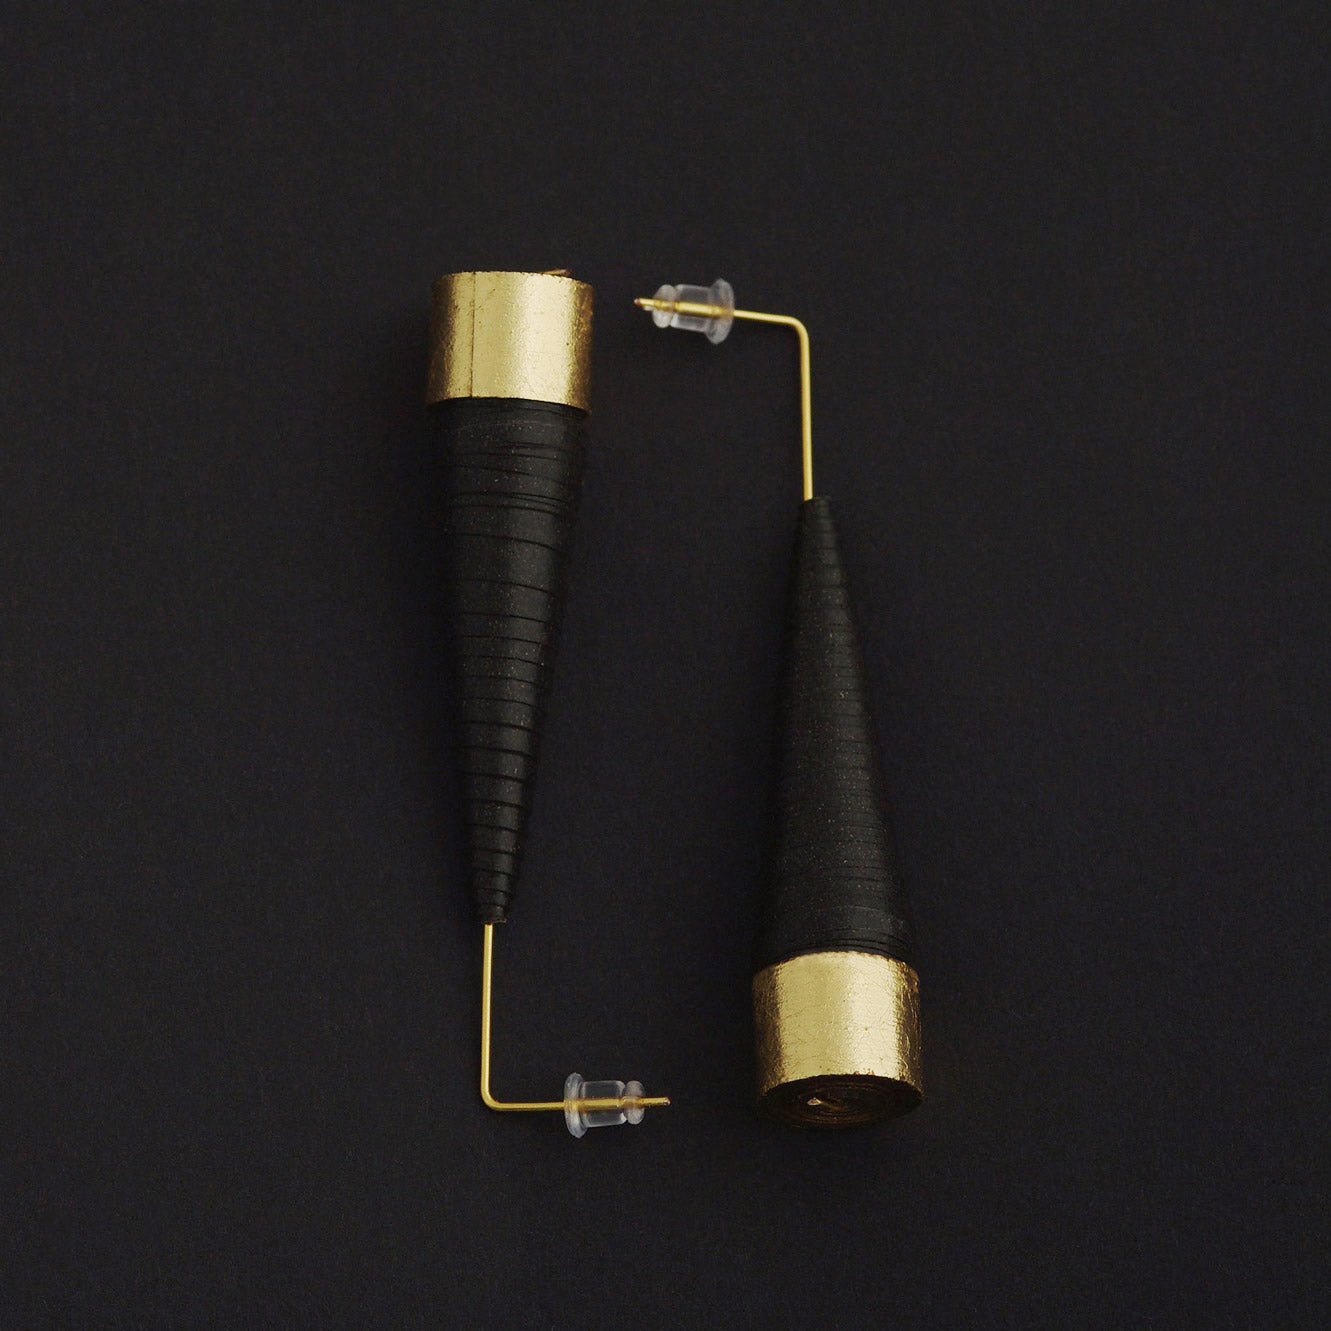 Black and Golden Conical Paper Earrings by Chiramo Paper Jewelry Back to Black Collection